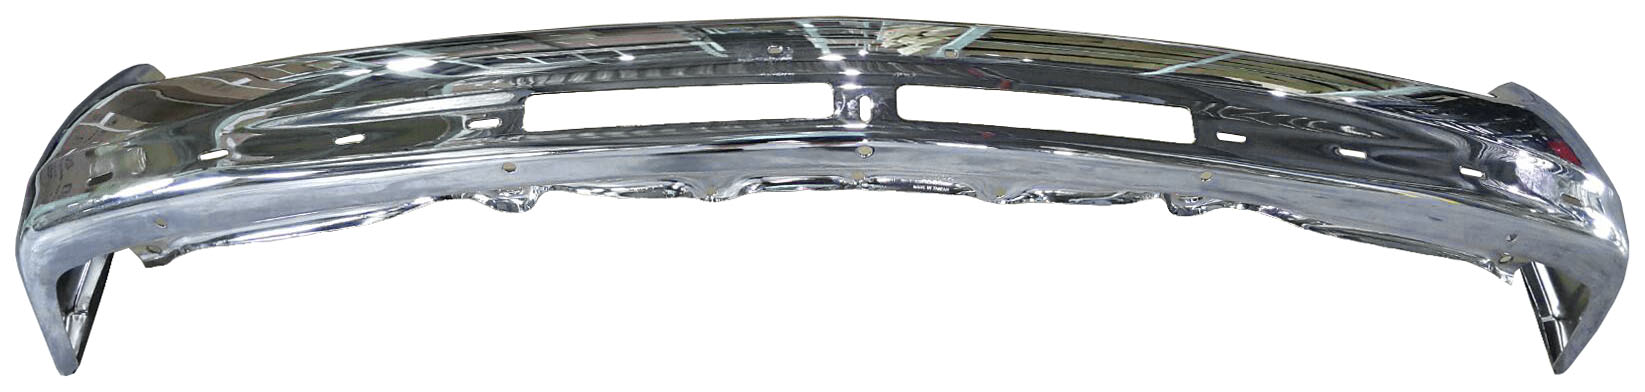 Aftermarket METAL FRONT BUMPERS for CHEVROLET - TAHOE, TAHOE,00-06,Front bumper face bar